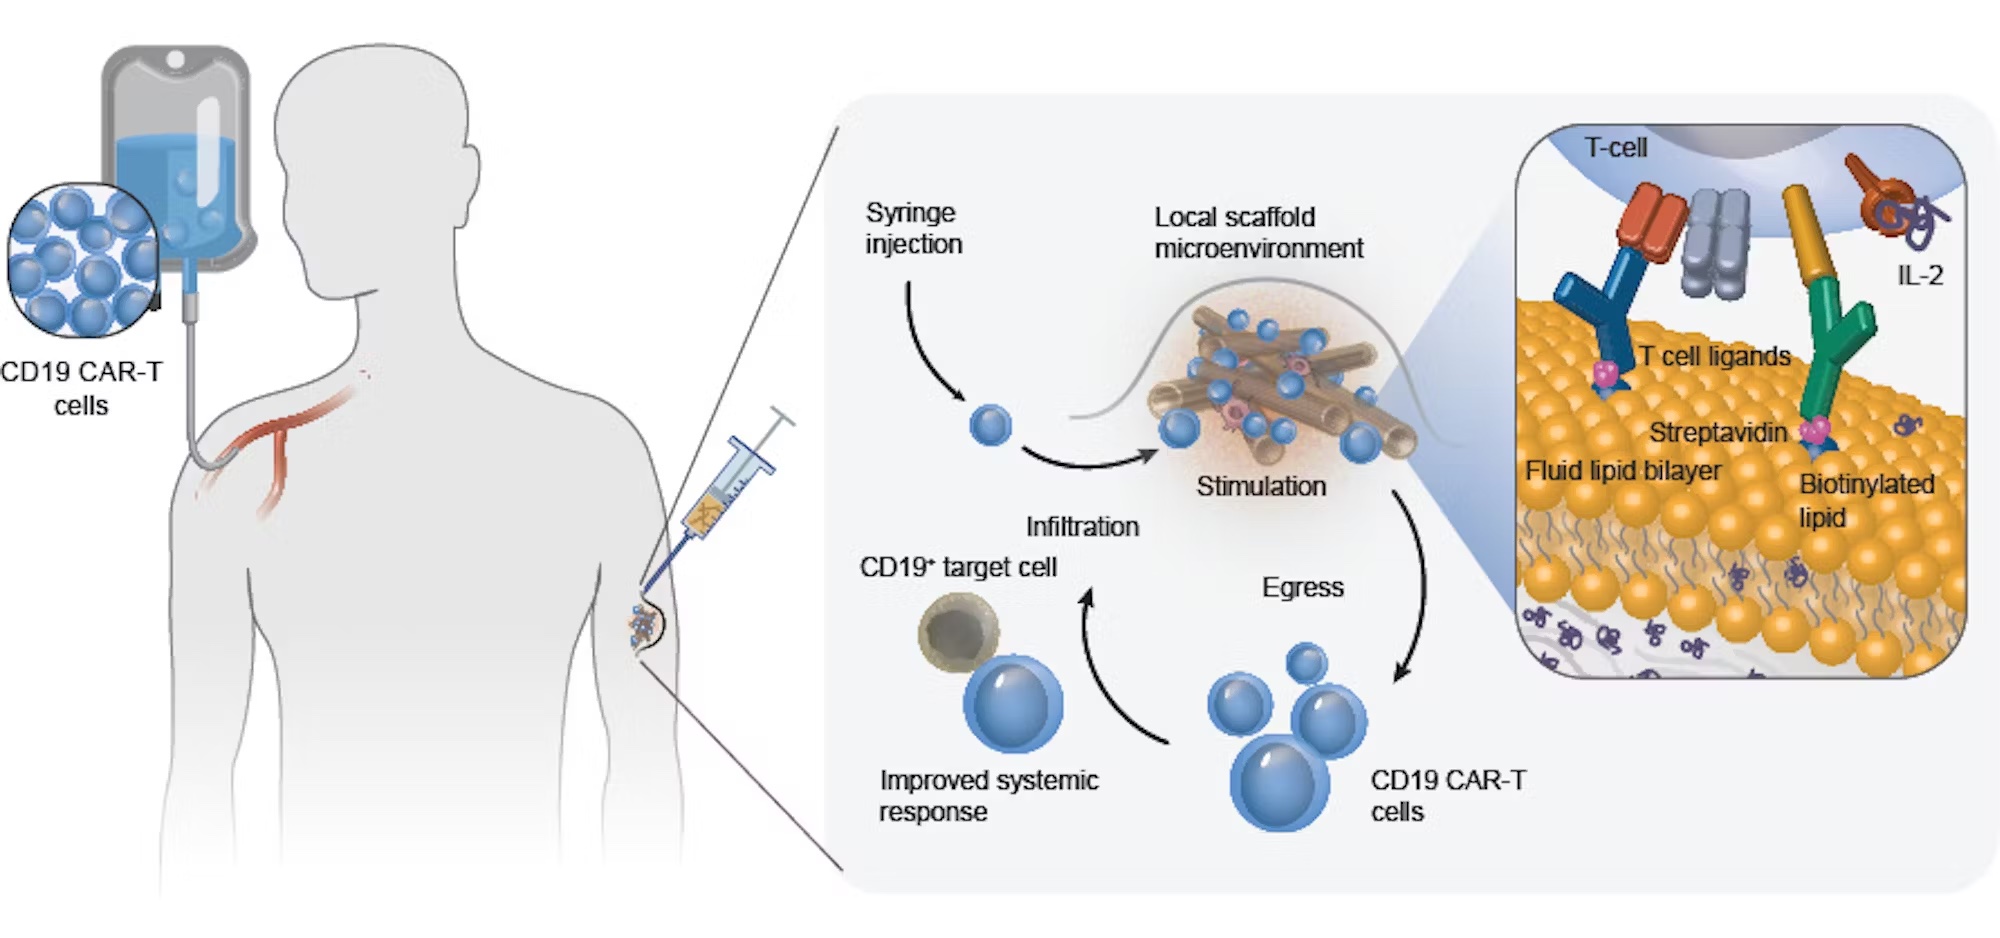 A graphic explaining how t-cell enhancing scaffolds help stimulate the production of antibodies to fight tumors